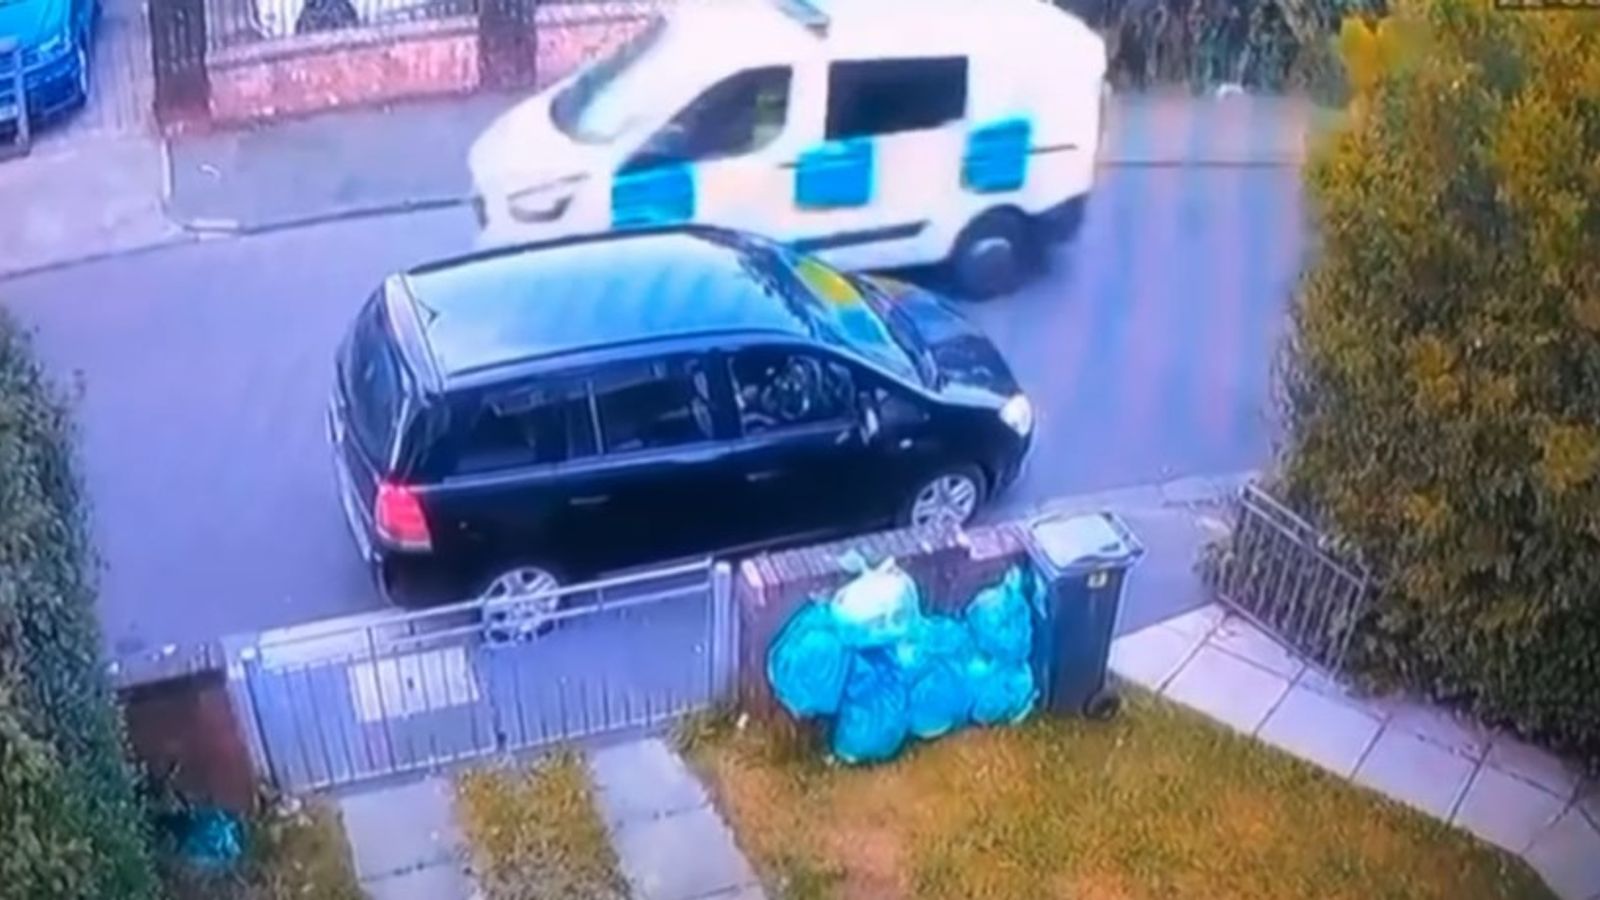 Cardiff riot: Police force refers itself to watchdog as CCTV shows its van following e-bike before fatal crash